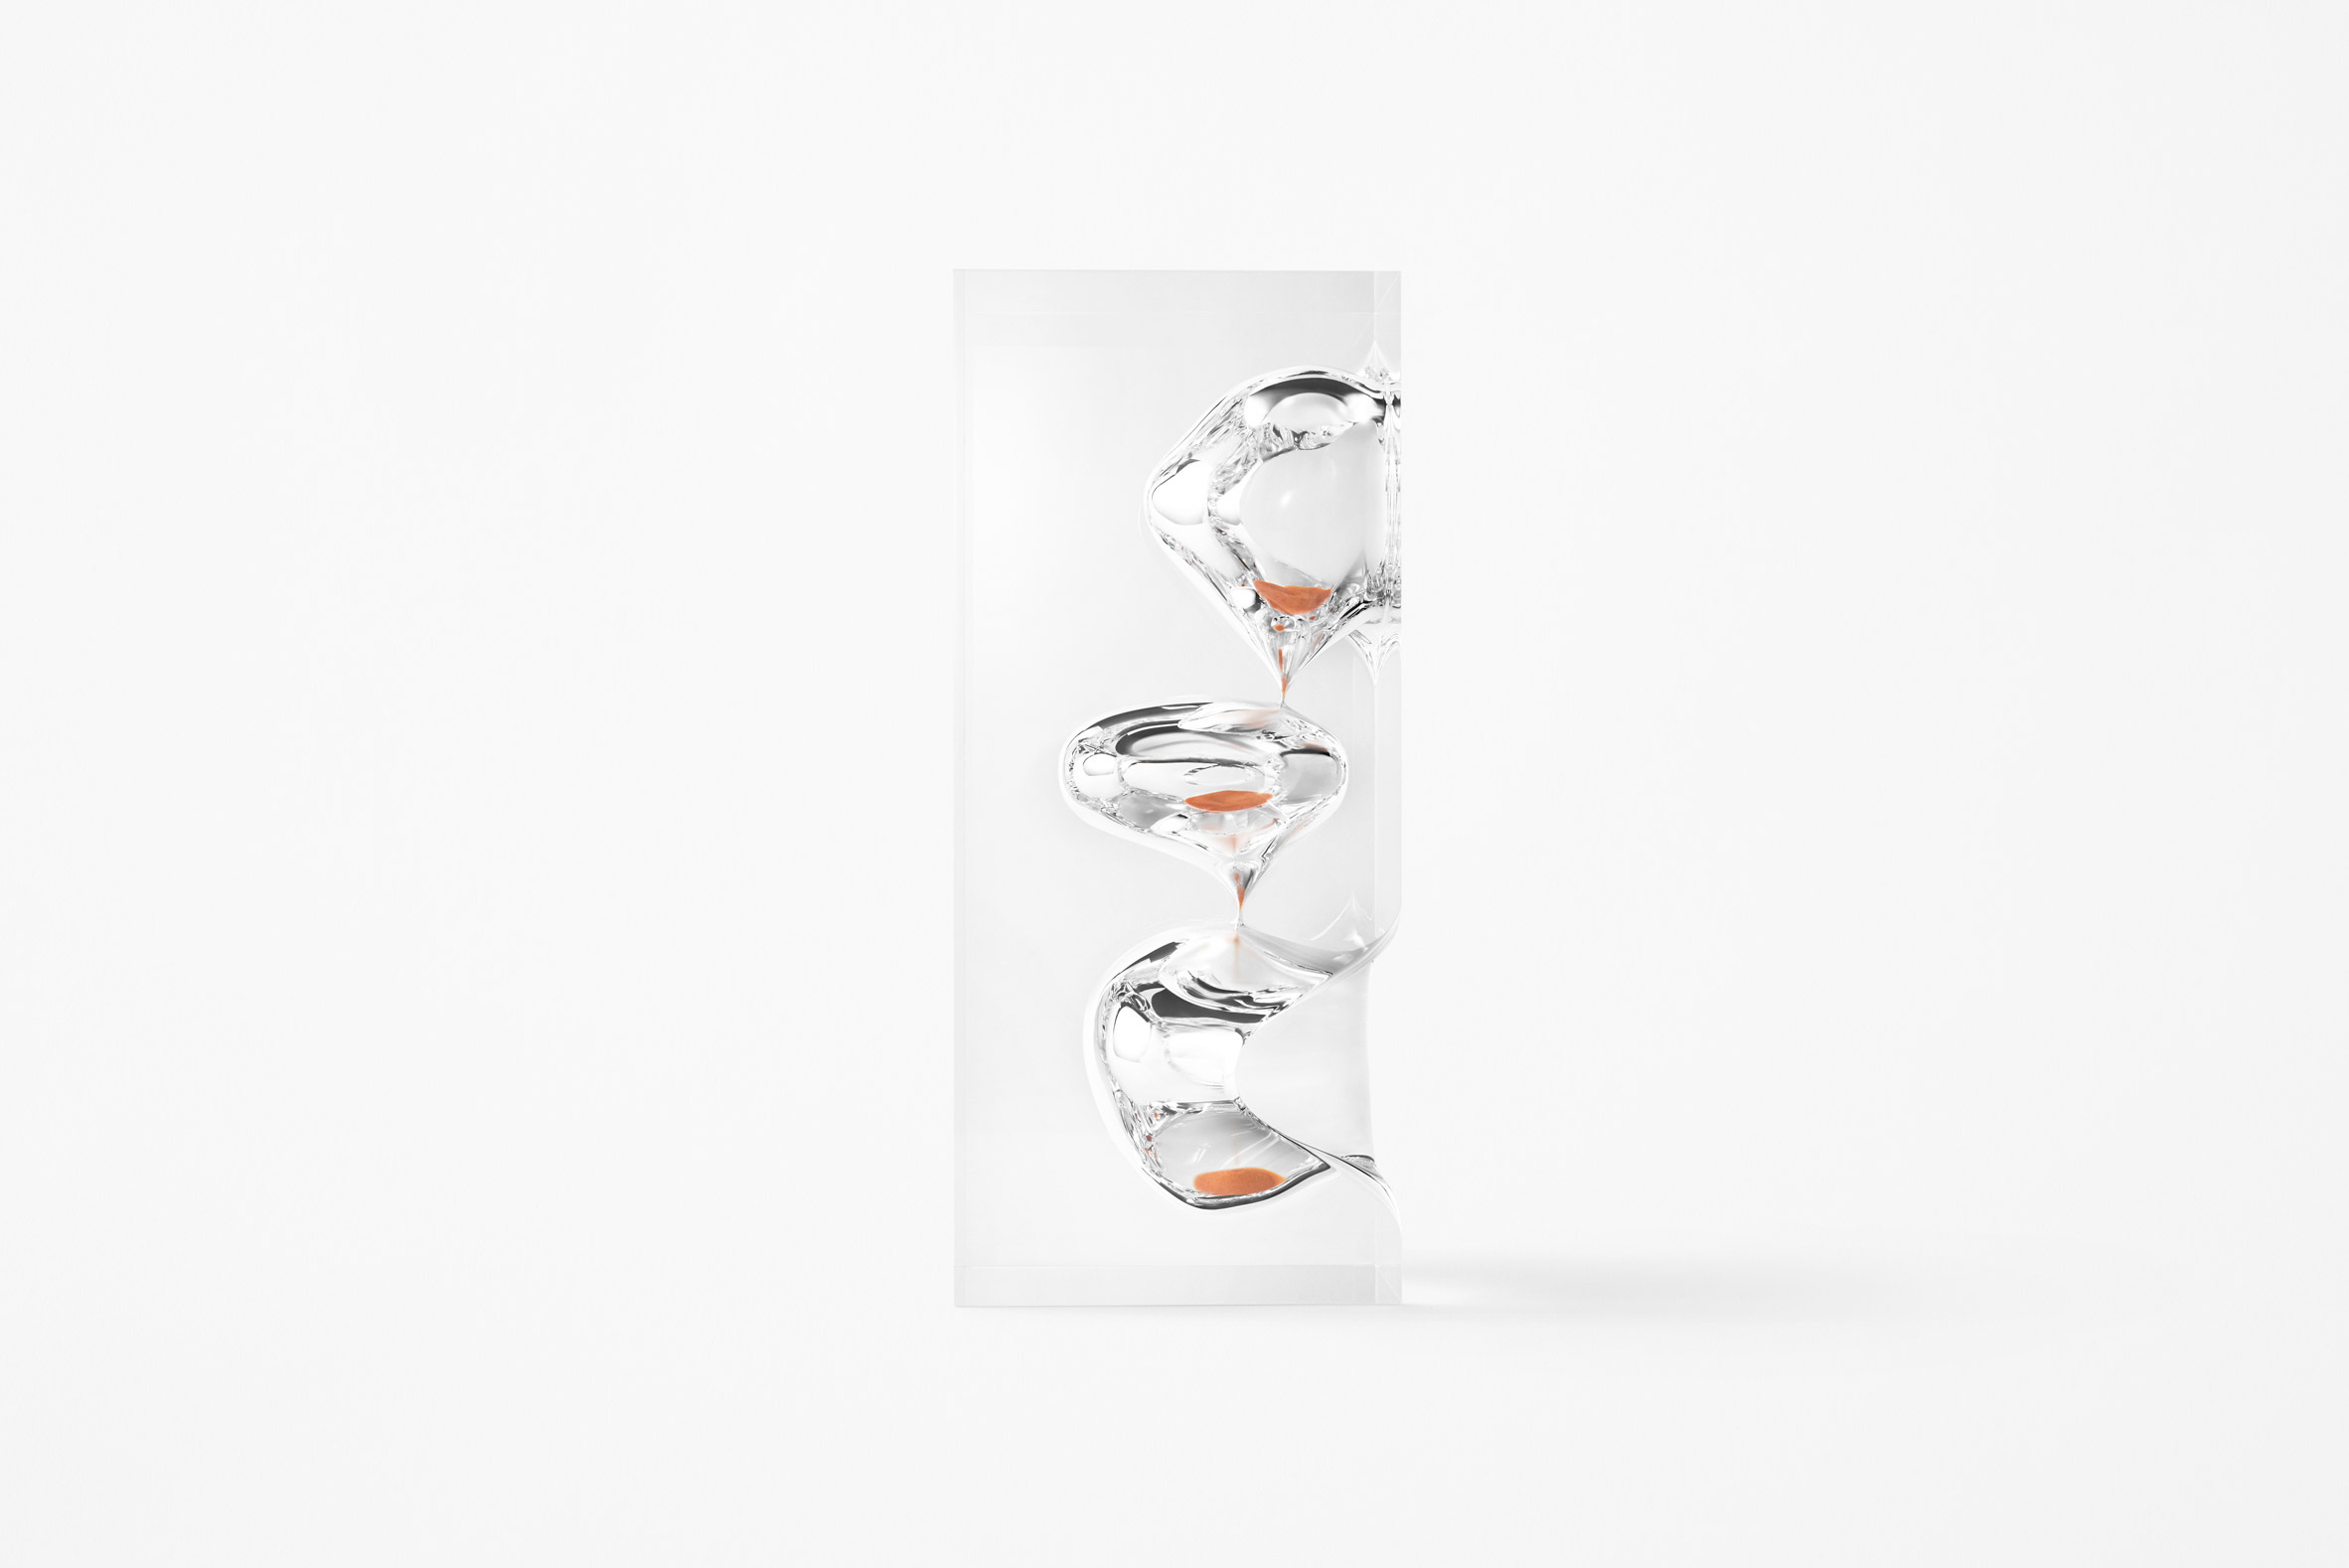 Nendo aims to "design time" with collection of unconventional hourglasses